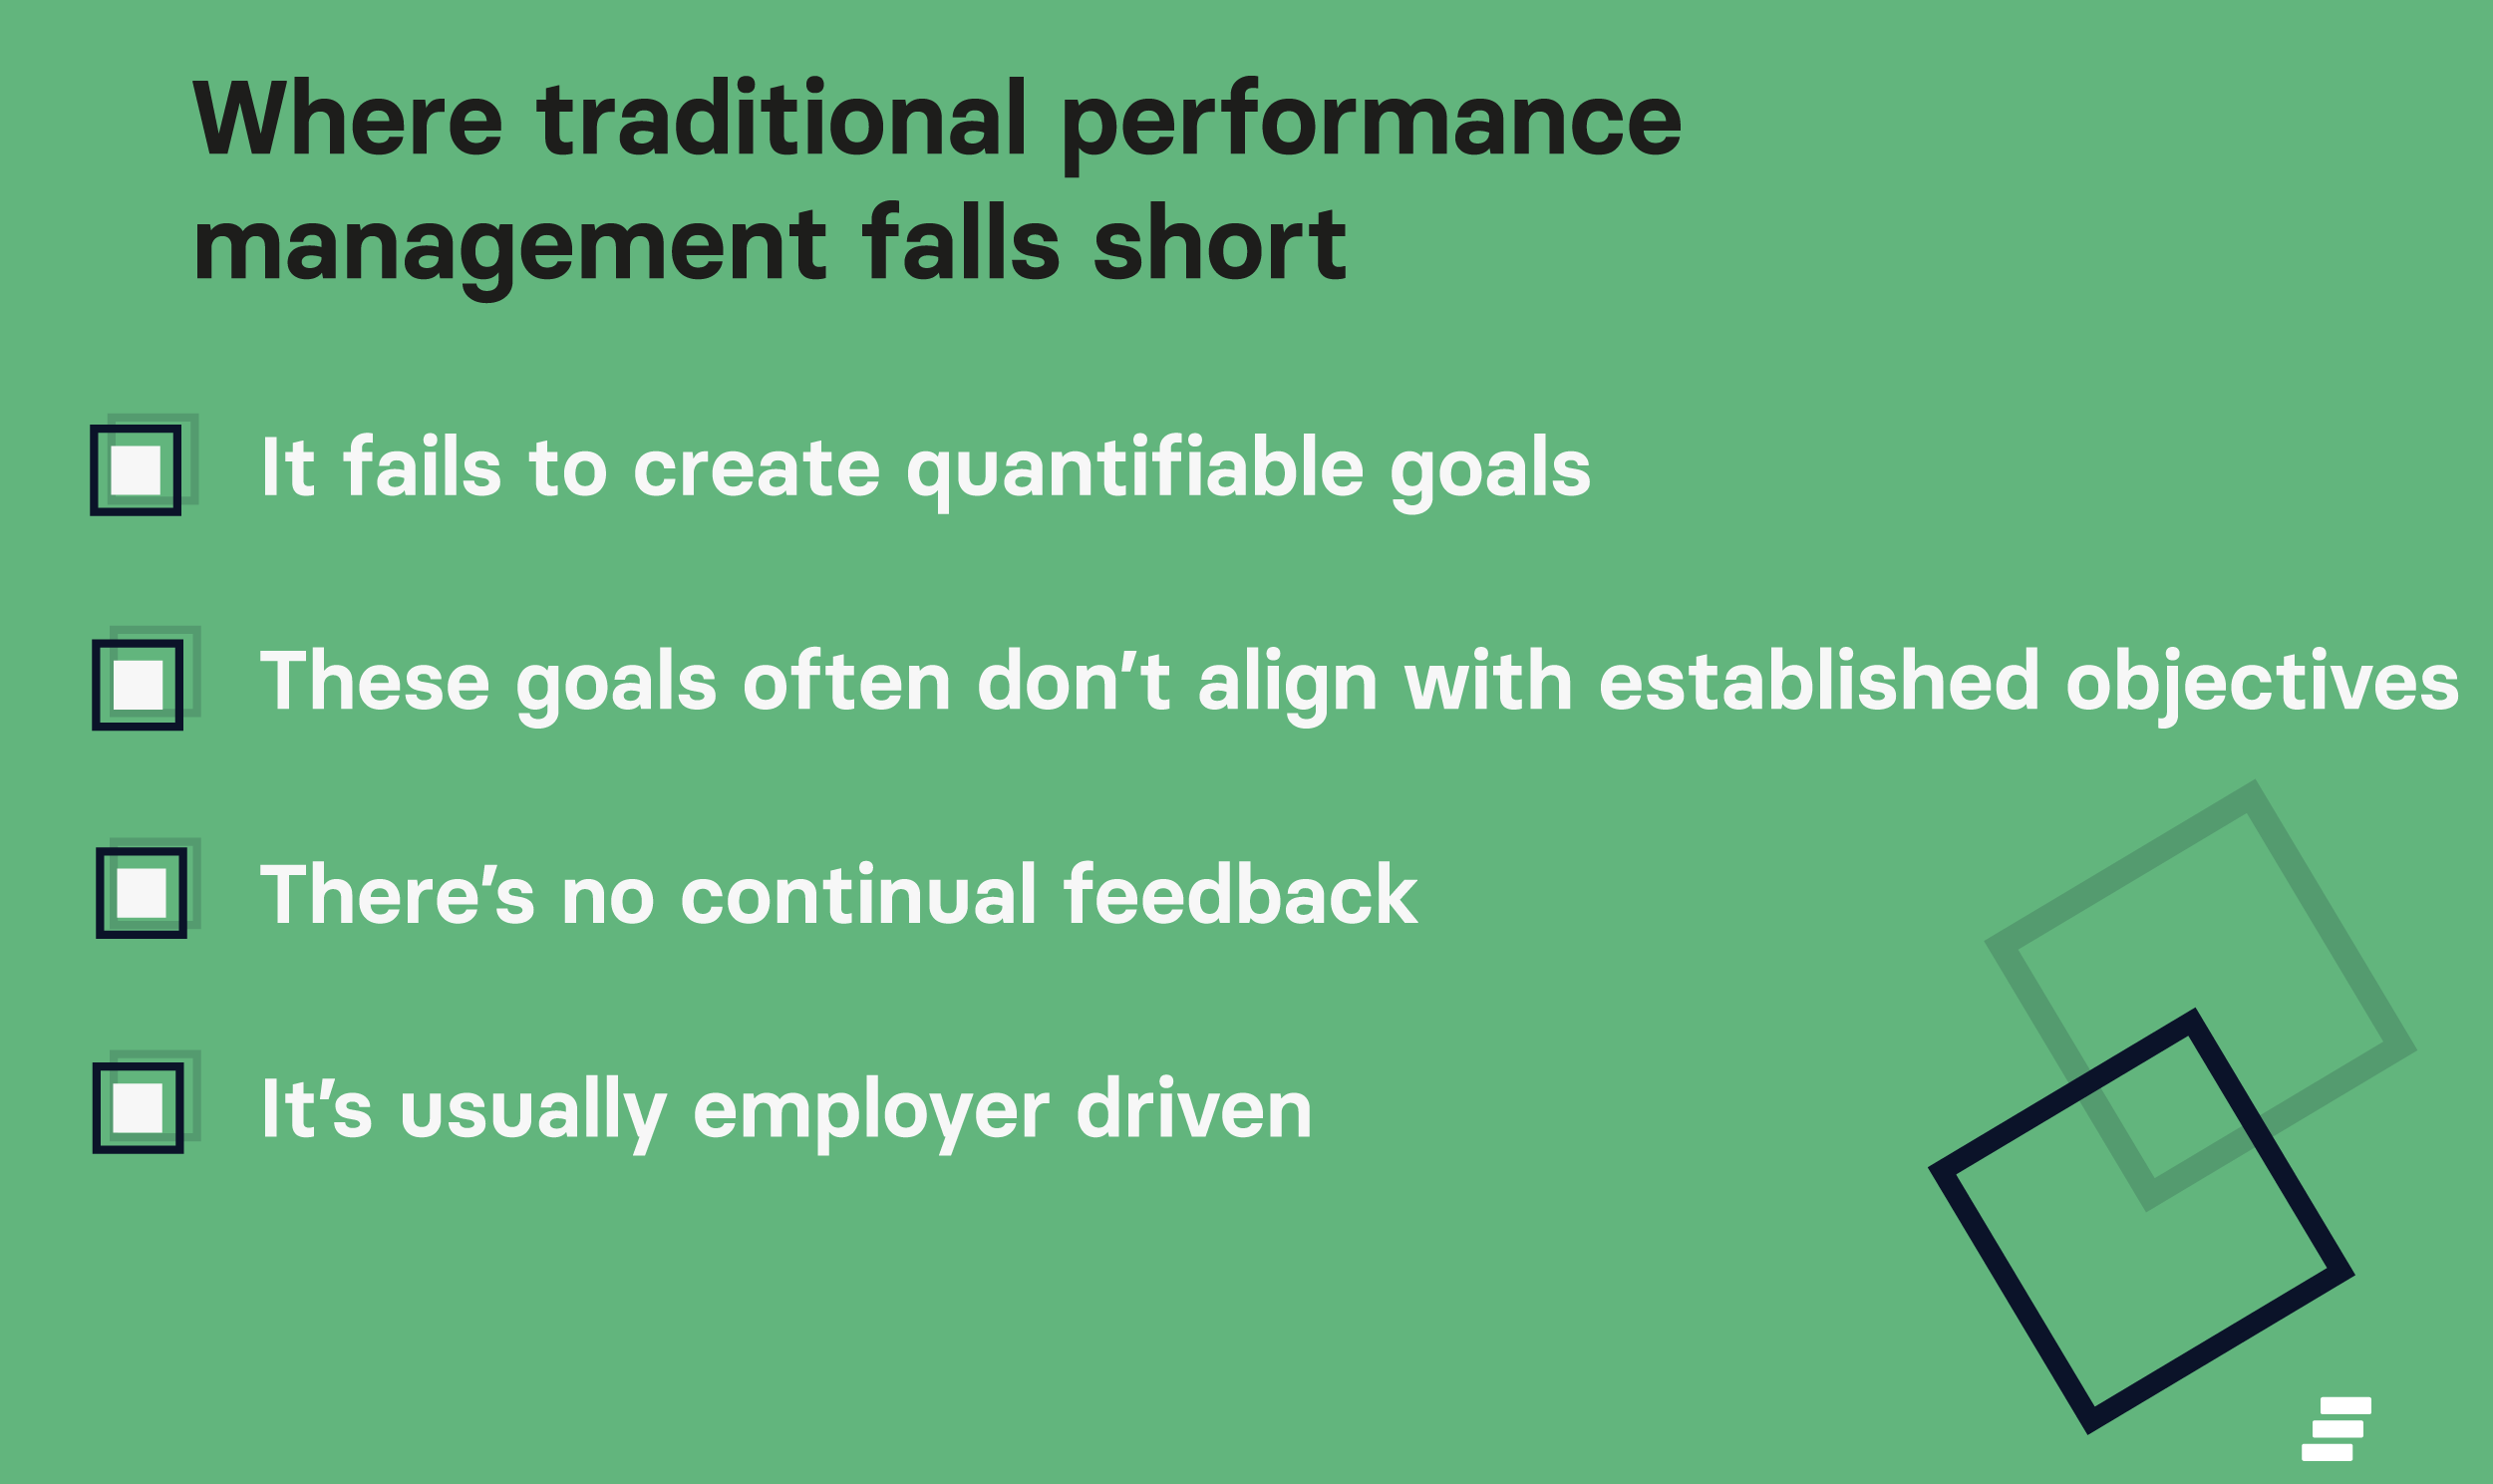 Graphic showing where traditional performance management falls short